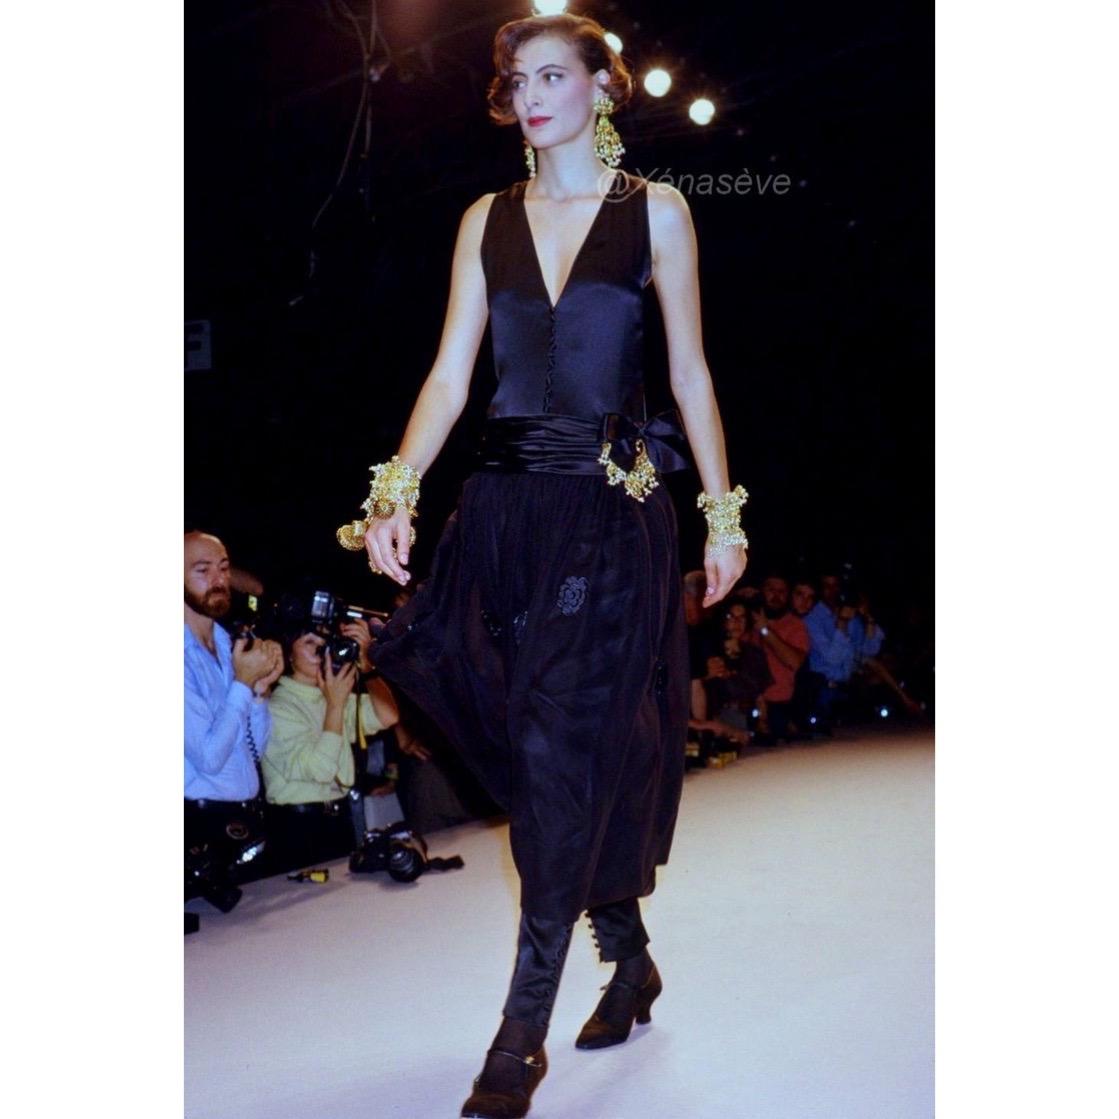 Exquisite and unique, this silk Chanel dress designed by Karl Lagerfeld is a masterpiece from the Spring Summer 1989 collection. Adorned with delicate camellia appliques, the skirt boasts an enchanting elegance as showcased by Ines de la Fressange